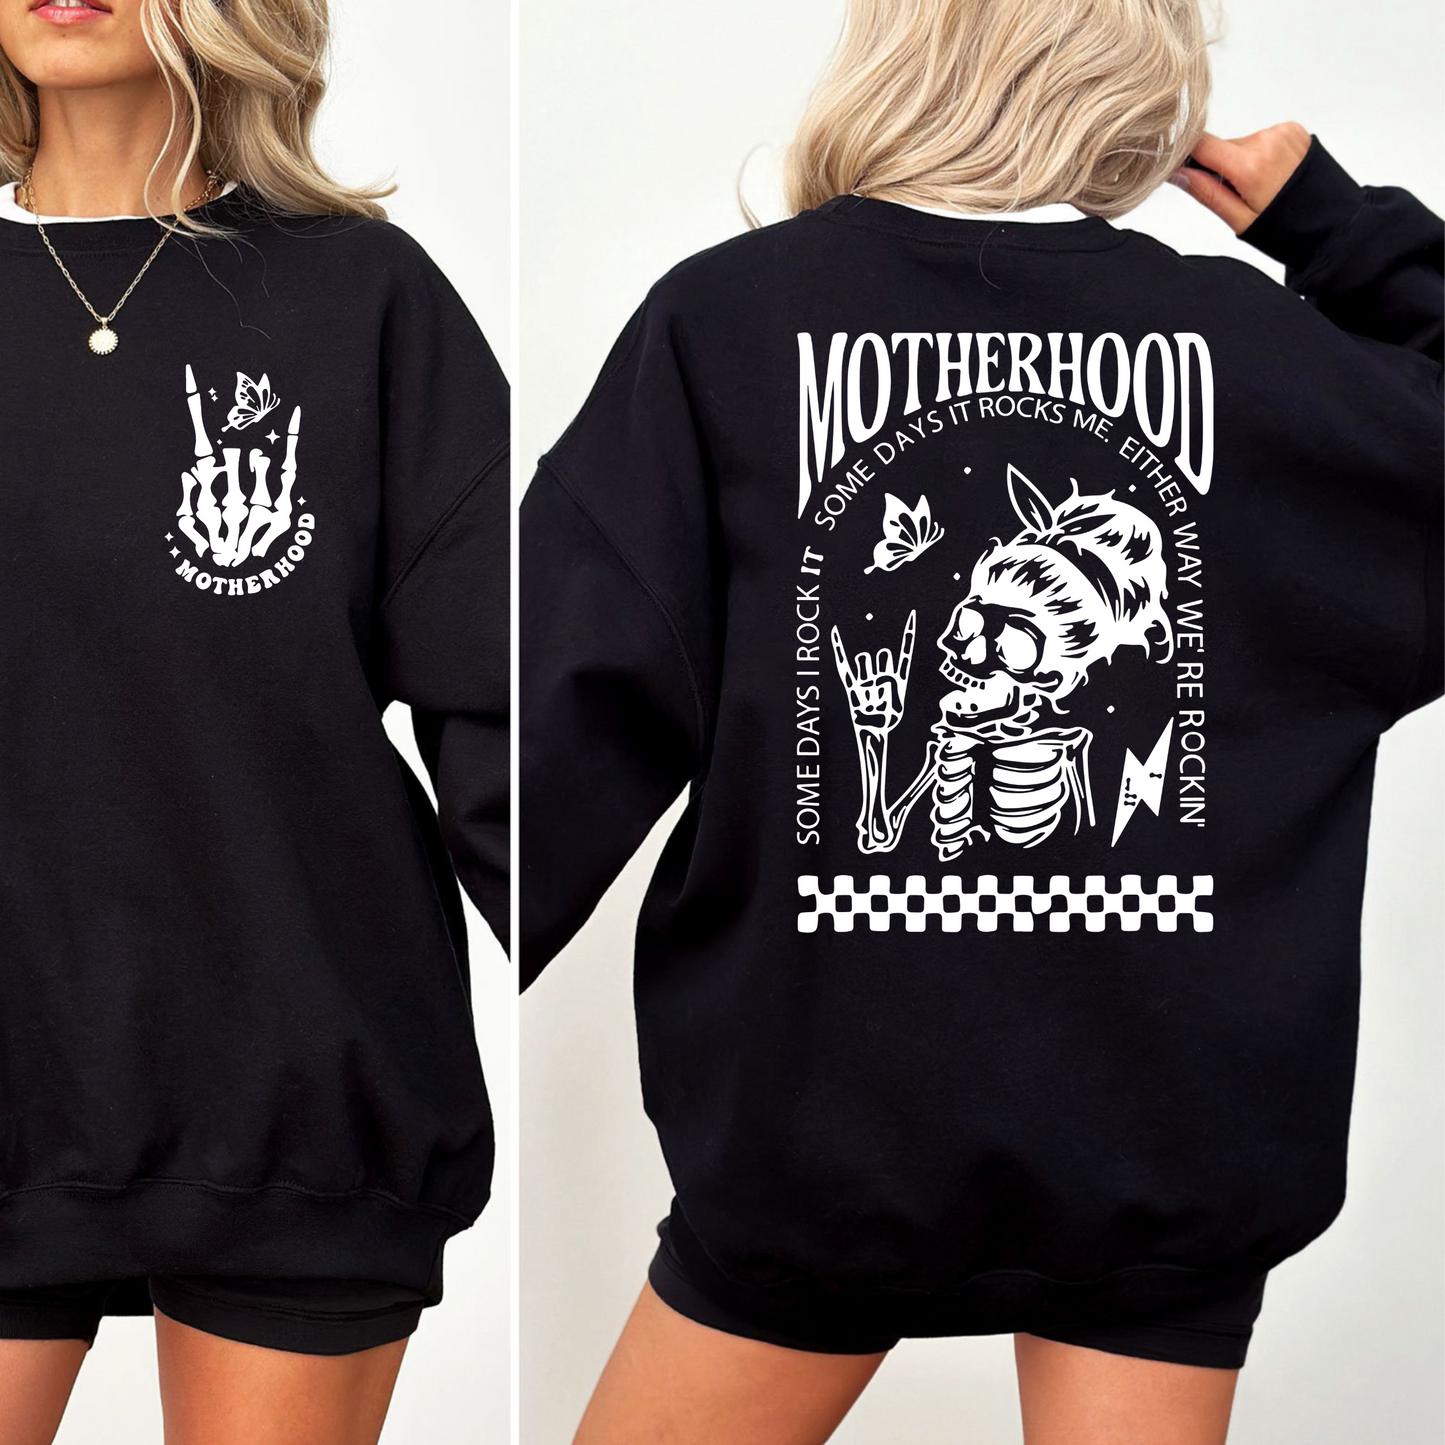 Motherhood Mantra Tee - Rocking and Being Rocked Moments